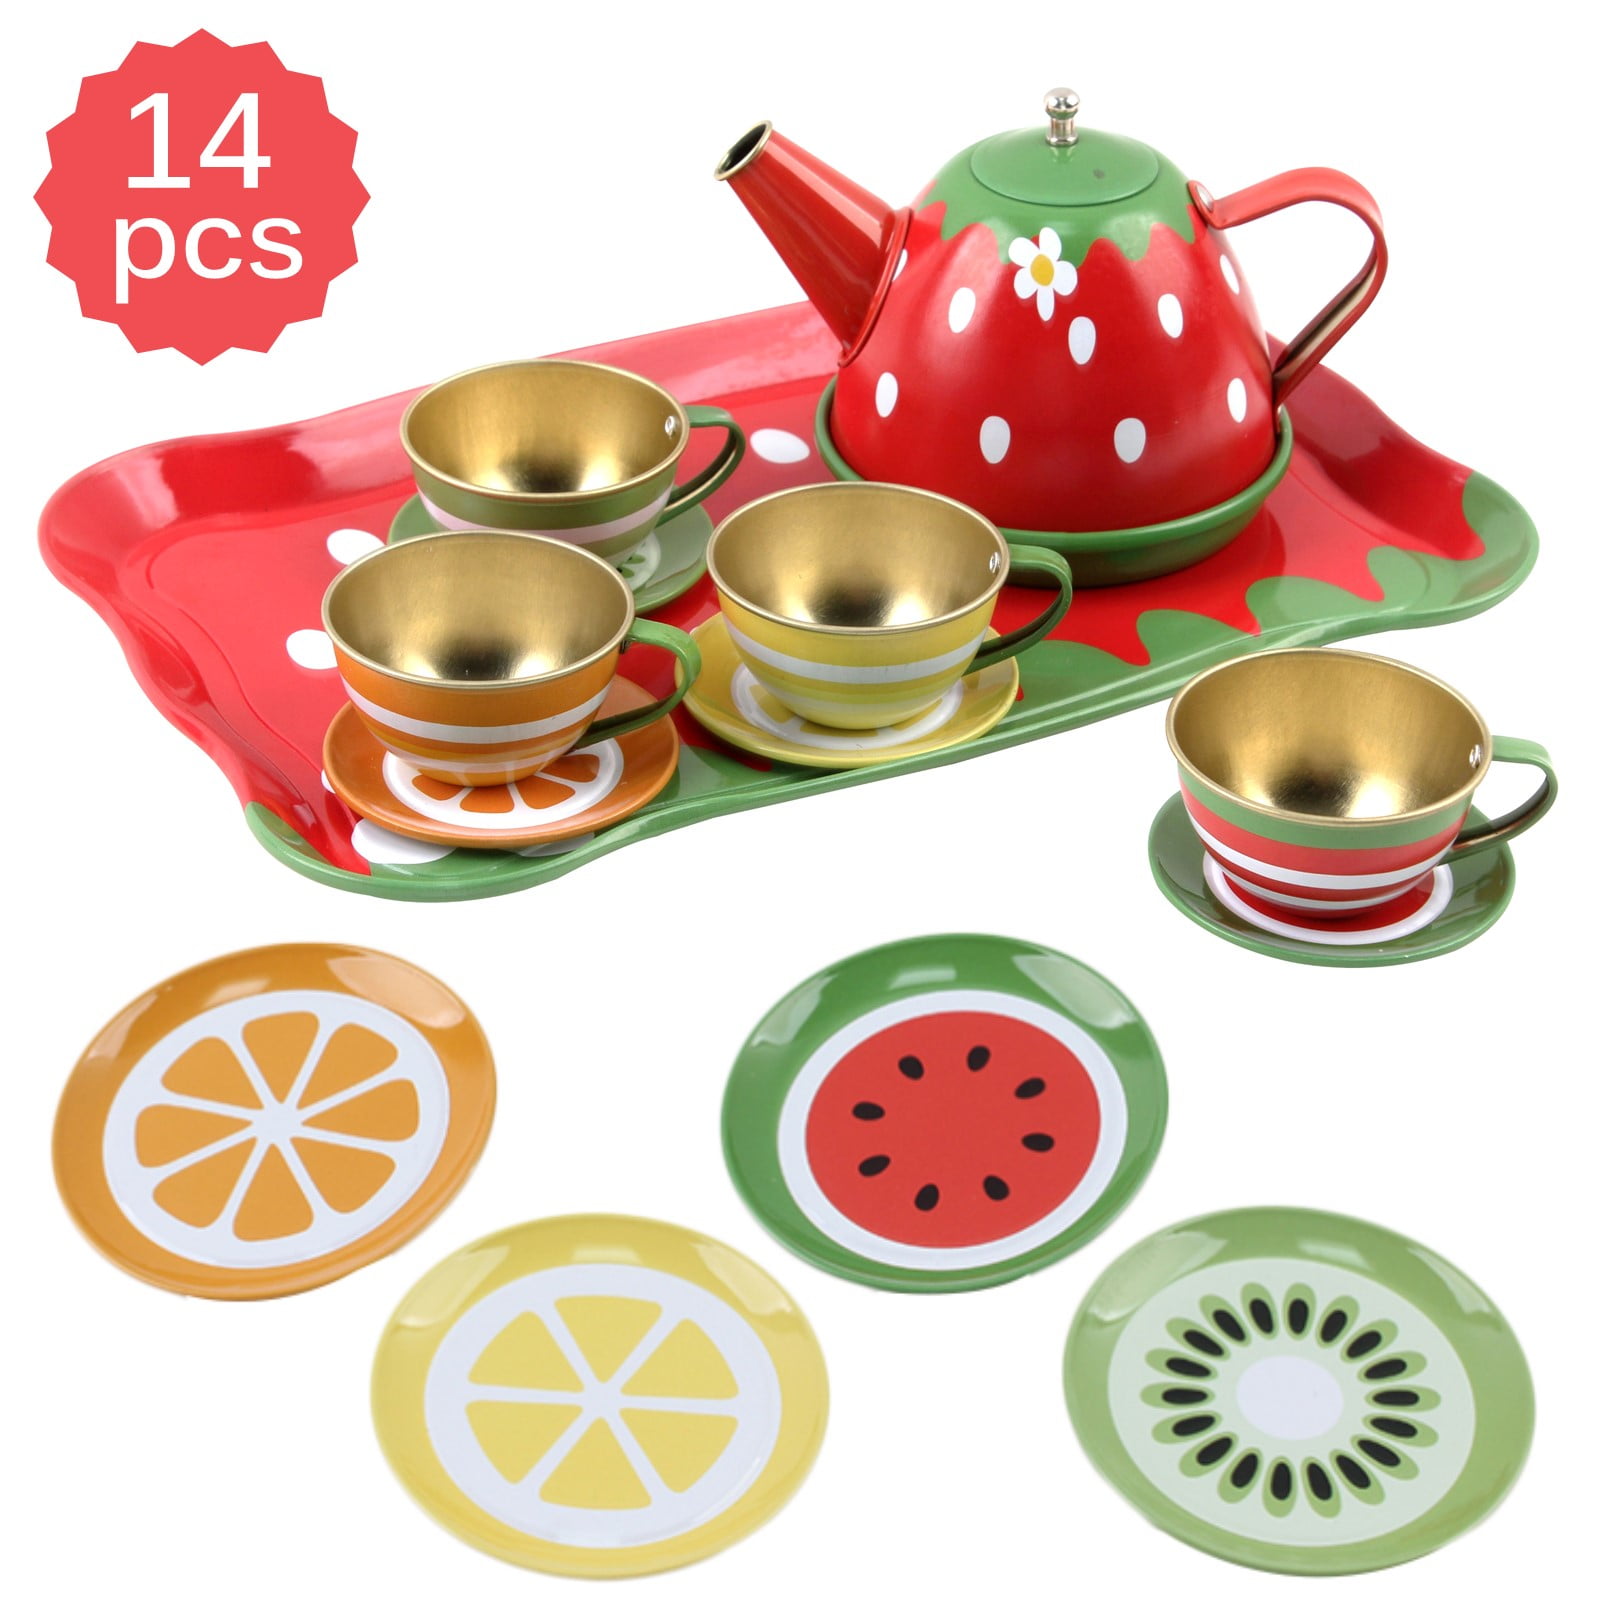 Role Play Tea Party Set with Cupcakes 16 Piece Pretend Toys for Kids Ice Crystal Dantoy Thorbjorn Tea Set with English Book